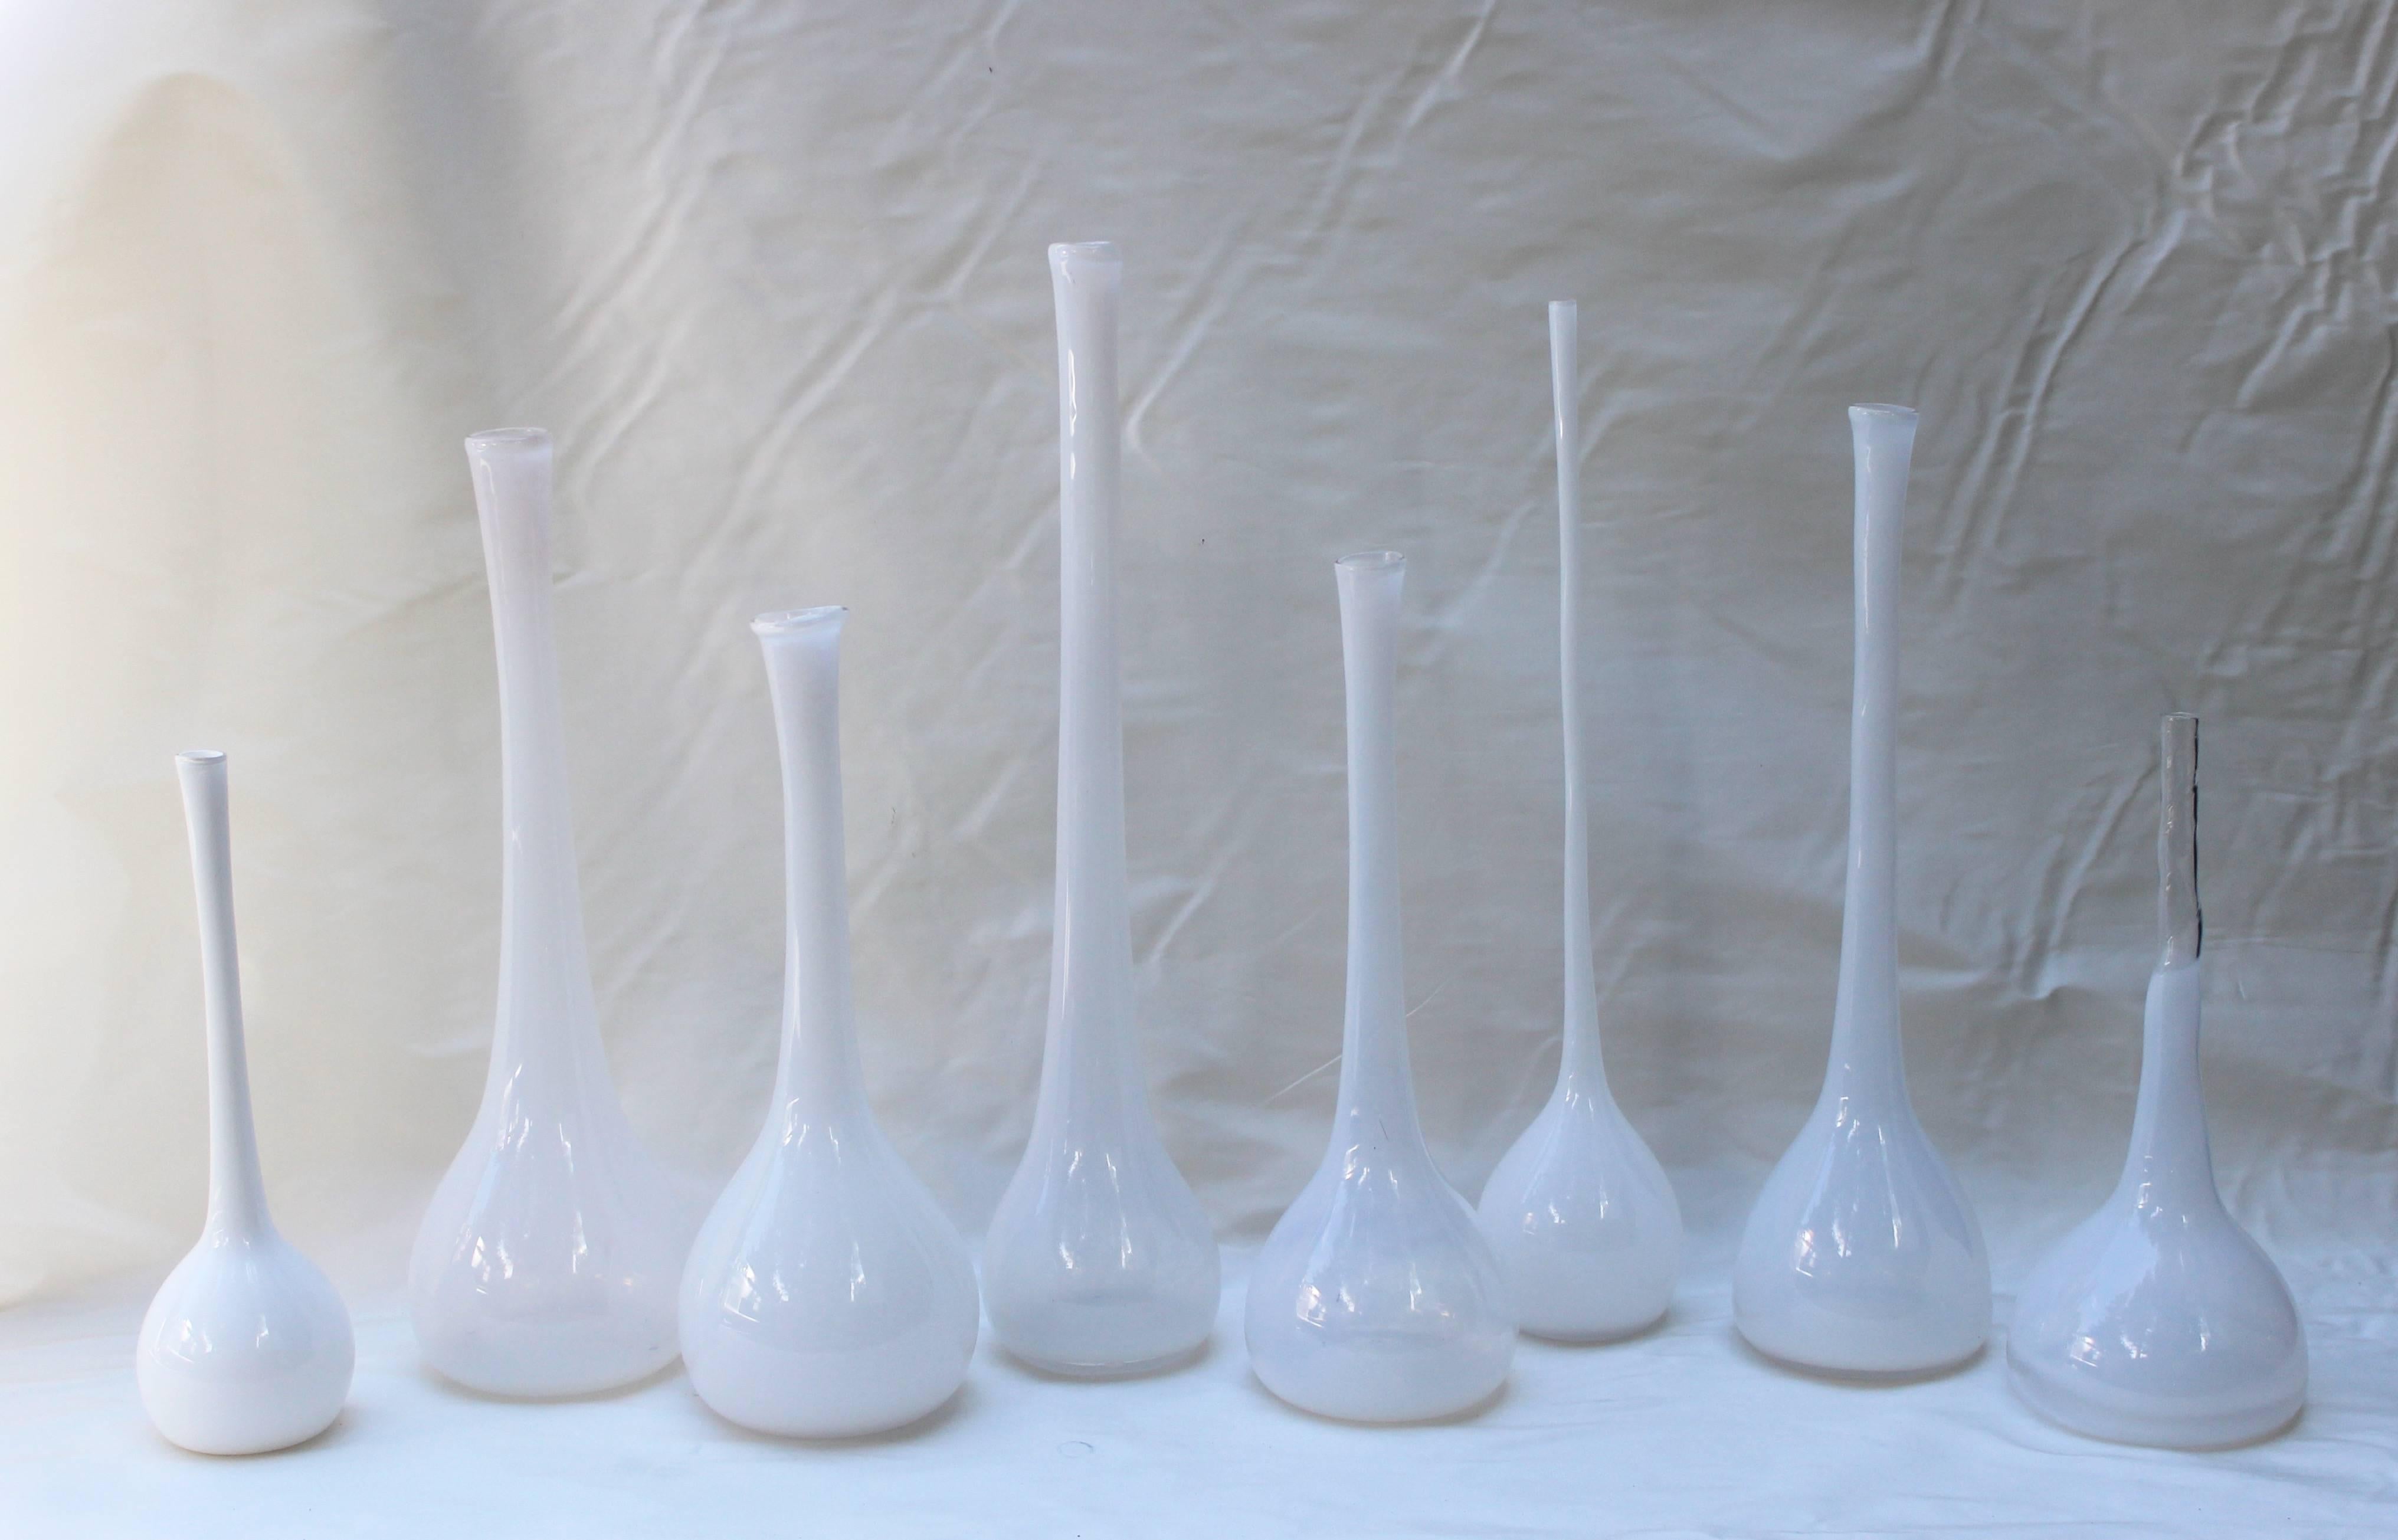 Great collection of eight white handblown glass vases of slightly varying depths and heights by artist Michael Anchin. Measures diameter of all 8 is approximately 4.5